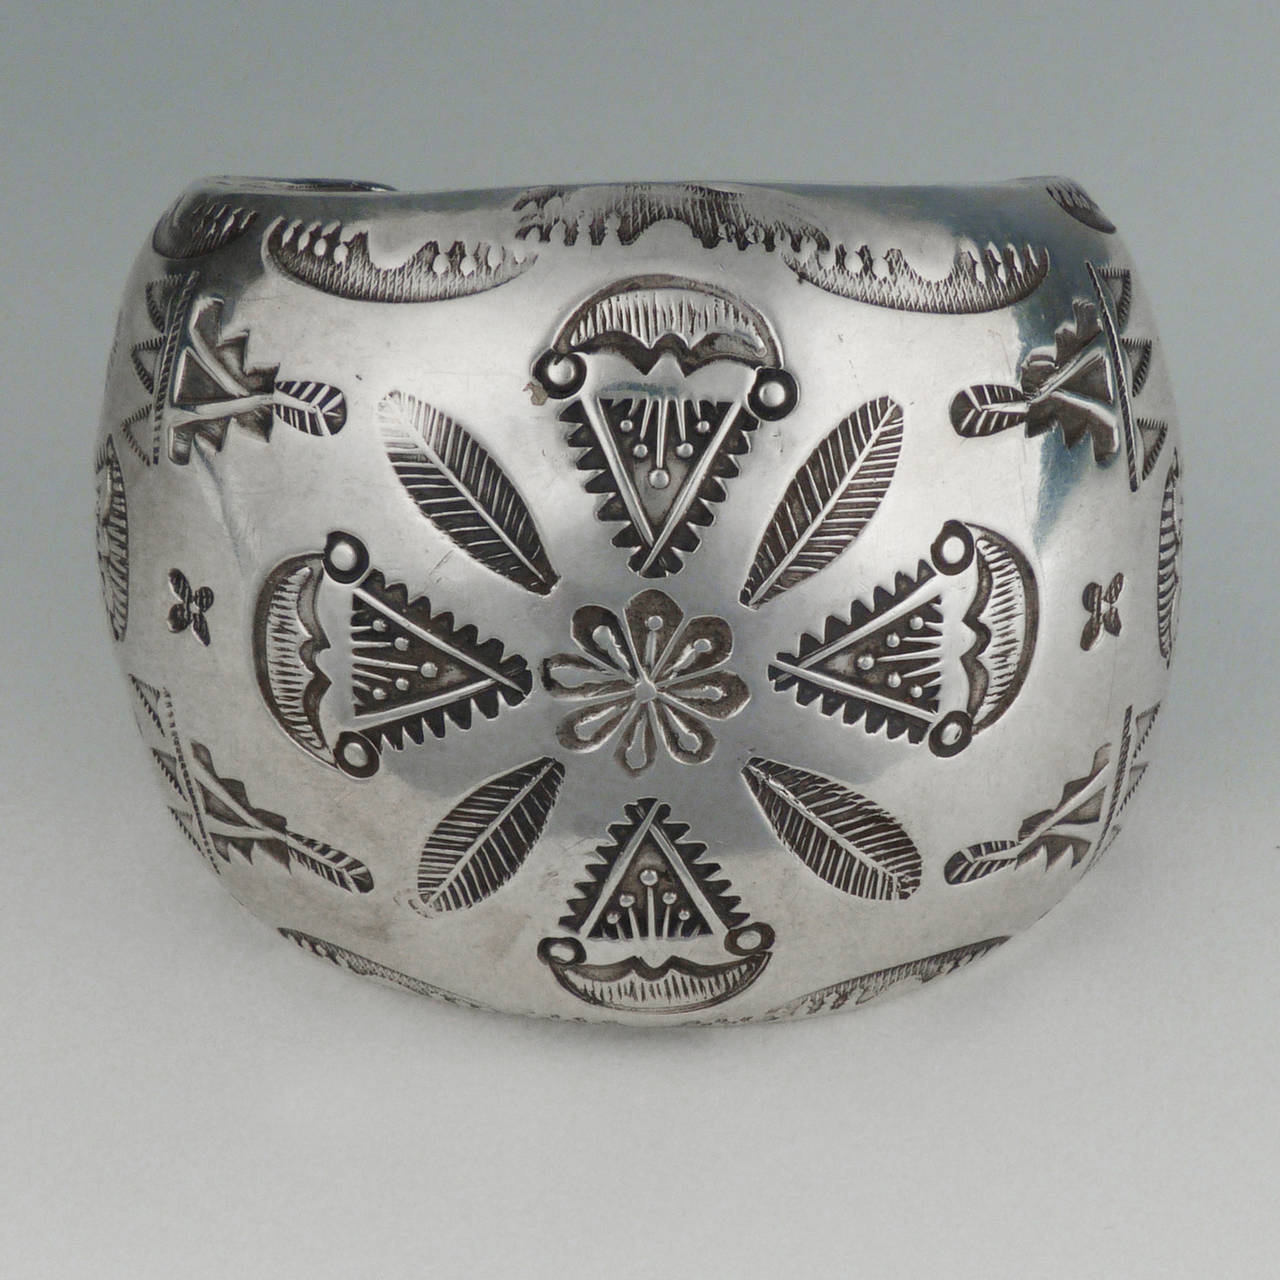 This vintage sterling silver cuff by renowned Hopi silversmith Ralph Tawangyawma (1894-1972) features a beautiful domed shape and ornate stamping. Formed entirely from two uniform pieces of heavy gauge sterling silver, the piece has a large presence